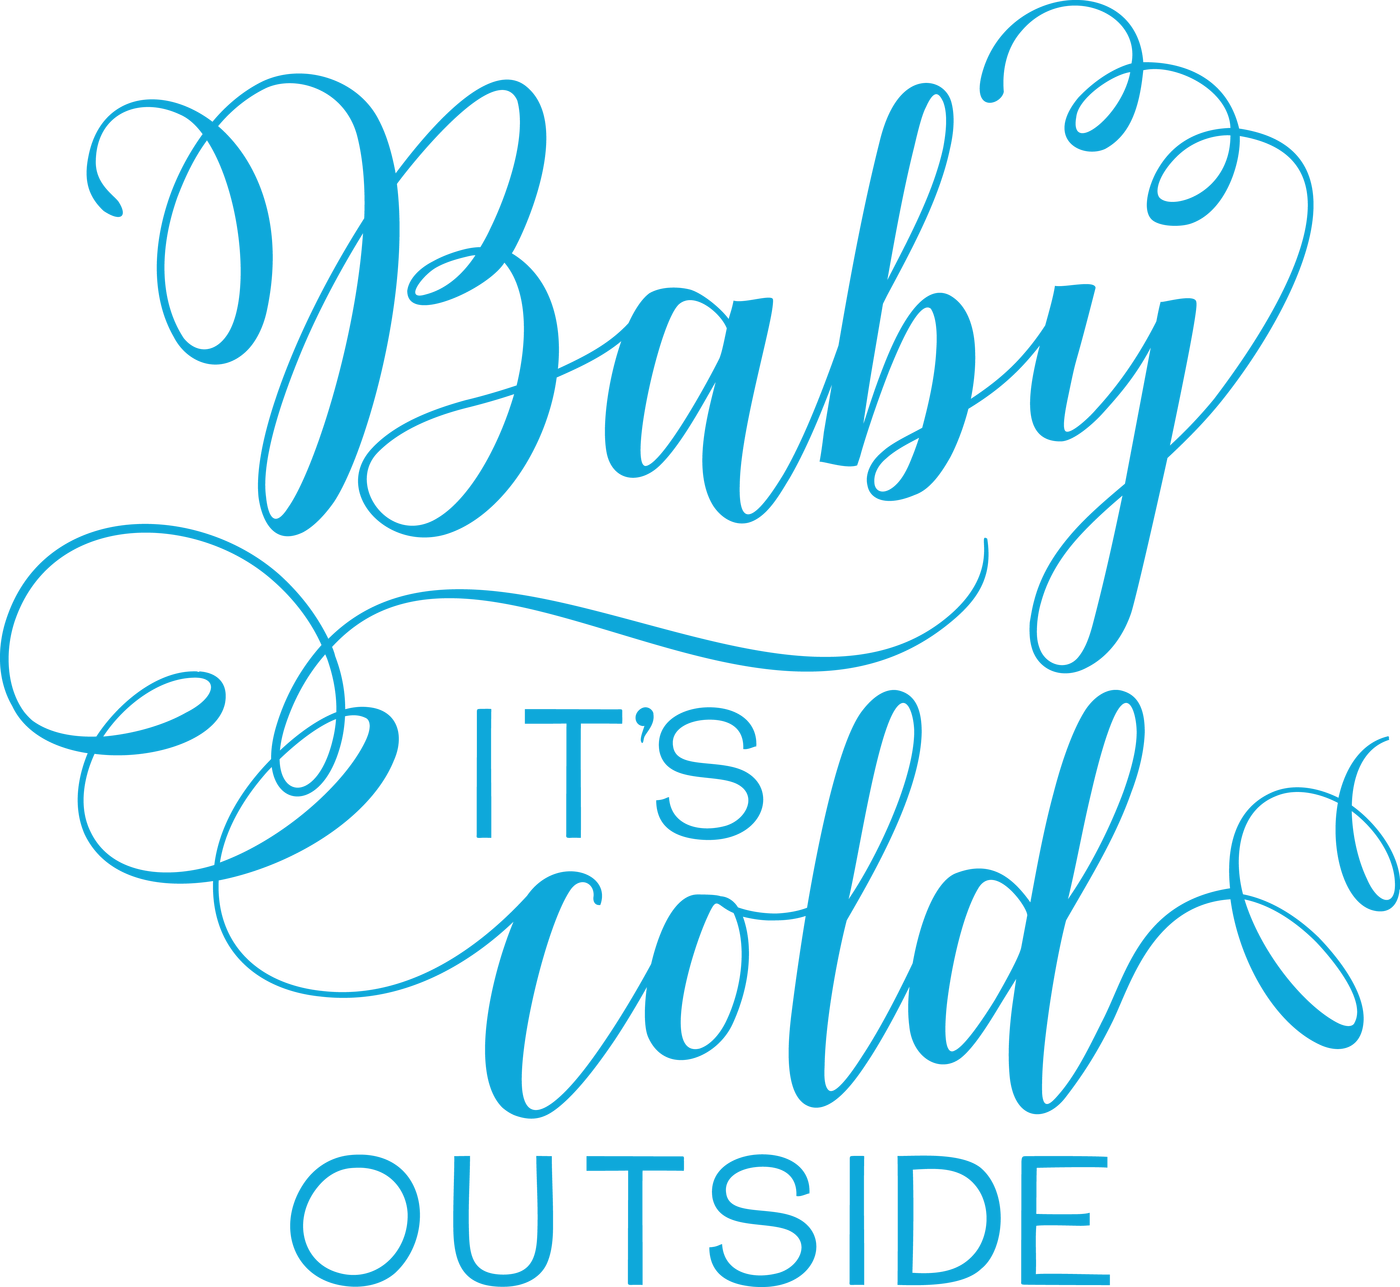 Baby Its Cold Outside Calligraphy PNG